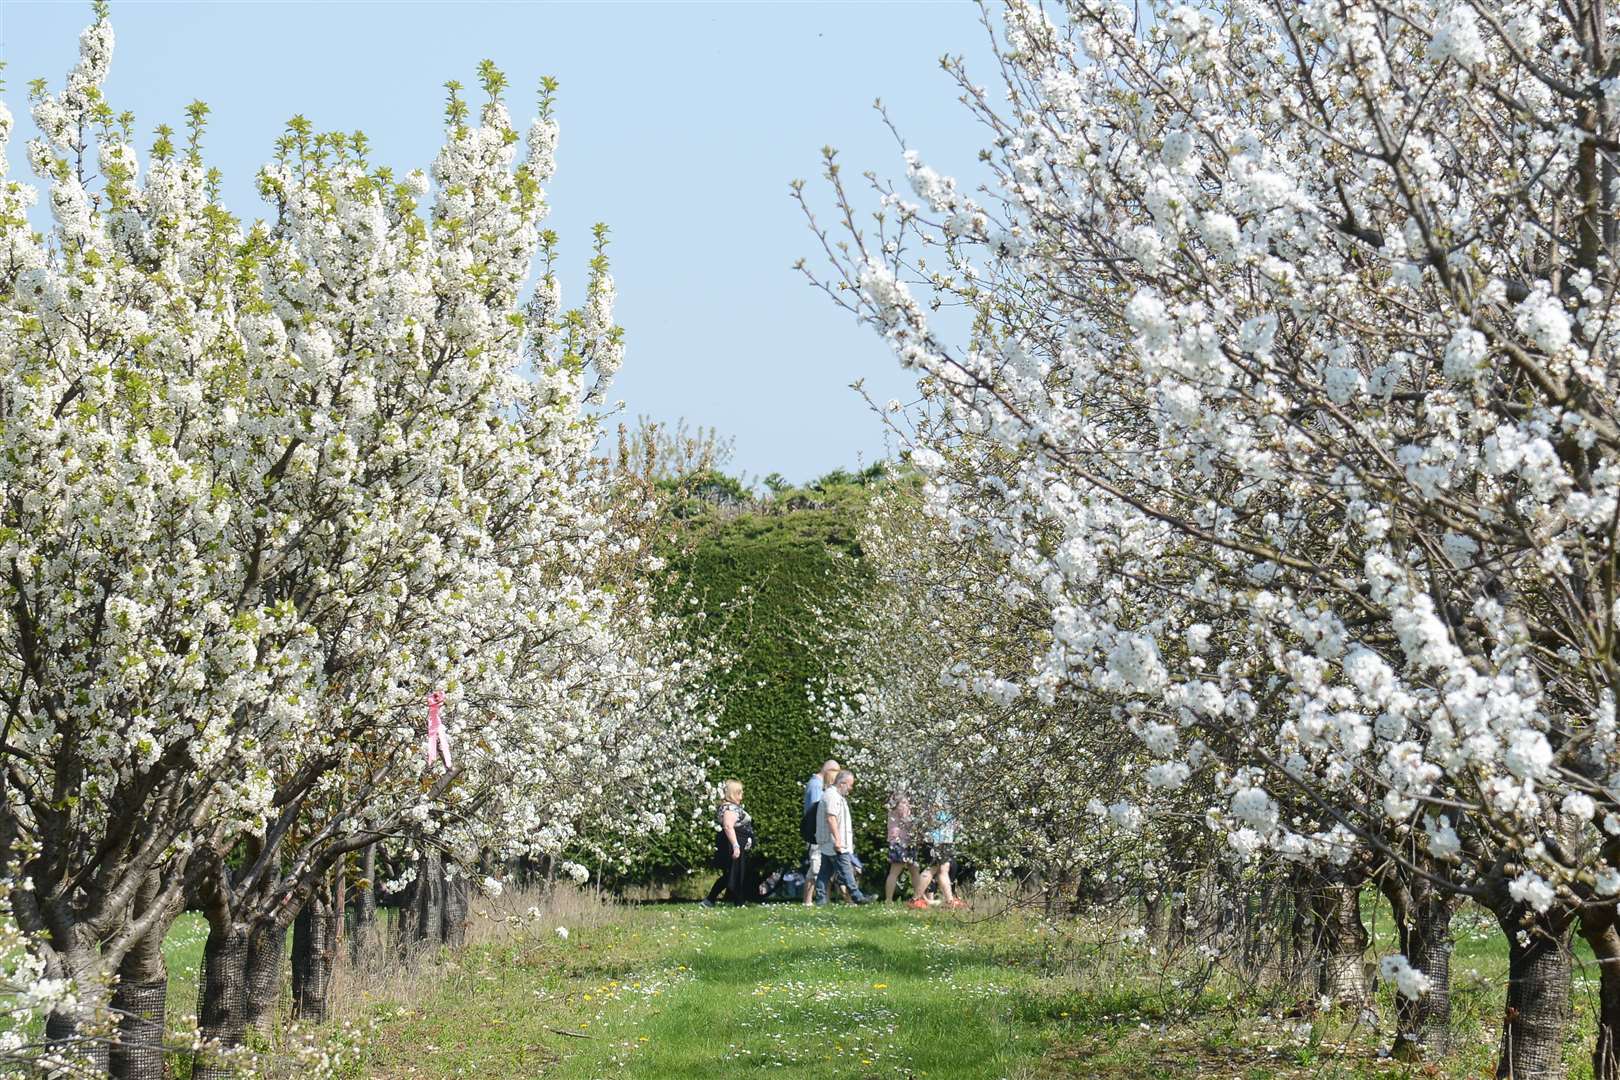 Brogdale, home of the national fruit collection, is offering people tours of its blossom this year